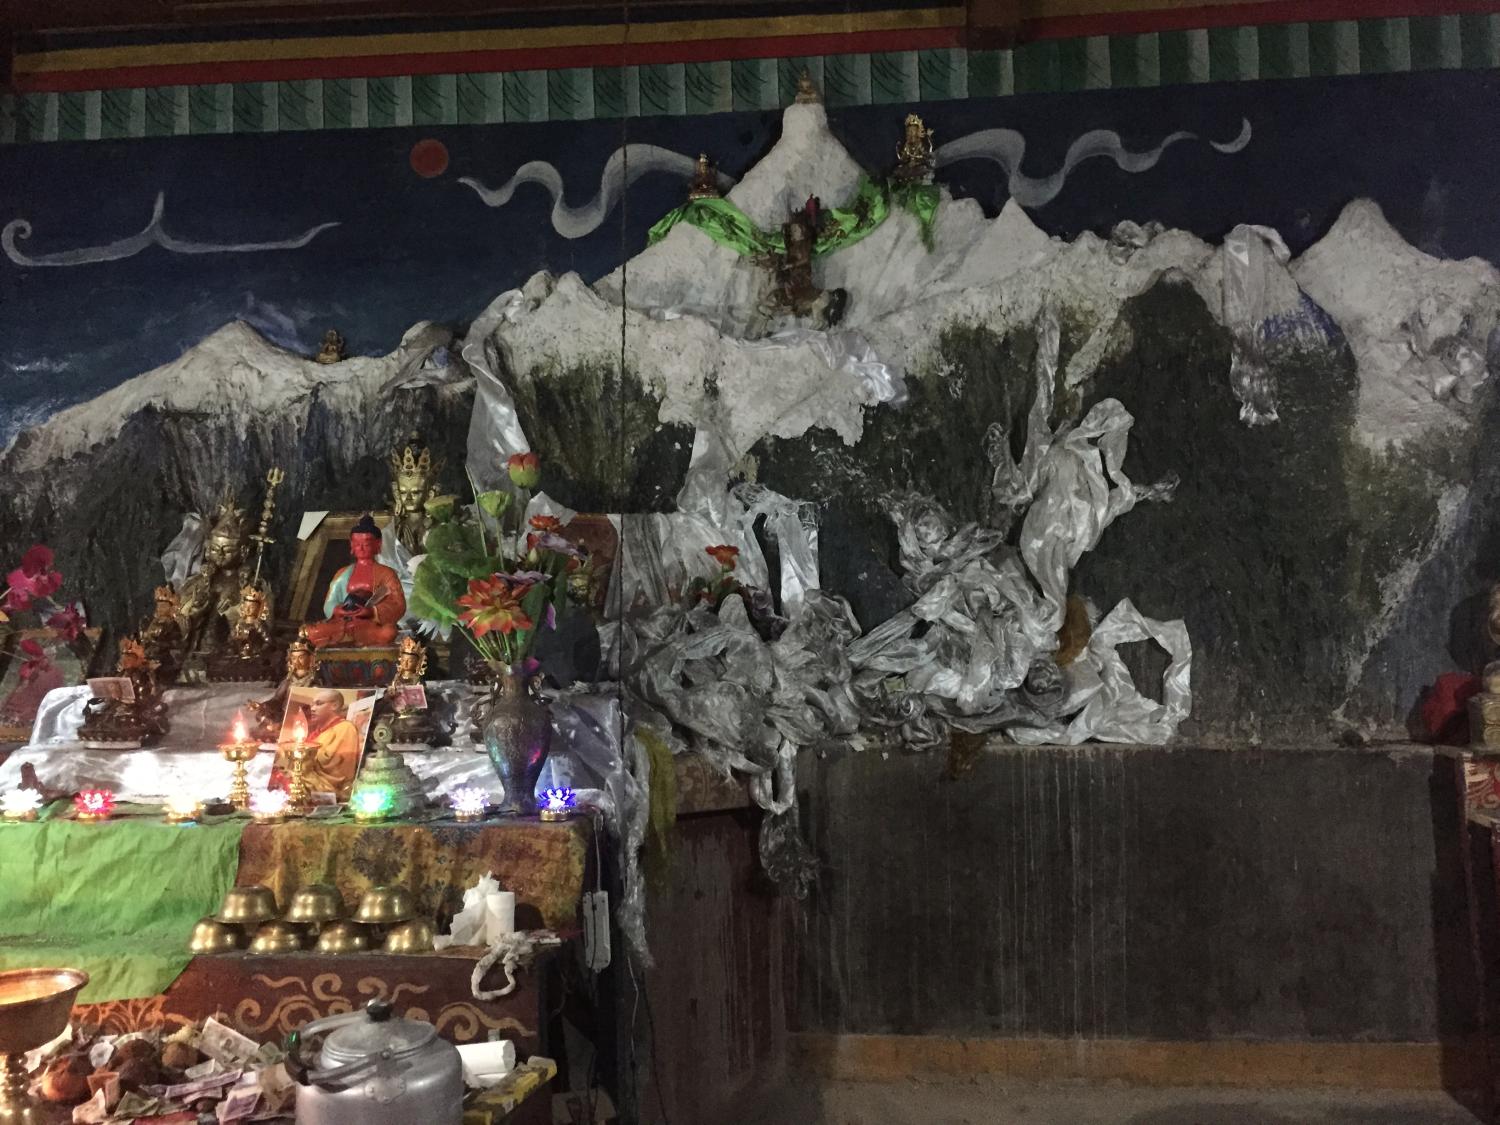 Sonam Norbu built a small temple, in which is this wall sculpture of the entire mountain range around Khawakarbo, to atone for his past sins as a hunter. It is located by a remarkable old grove of ancient cypress trees on the banks of the Mekong River at the edge of Bu Village.